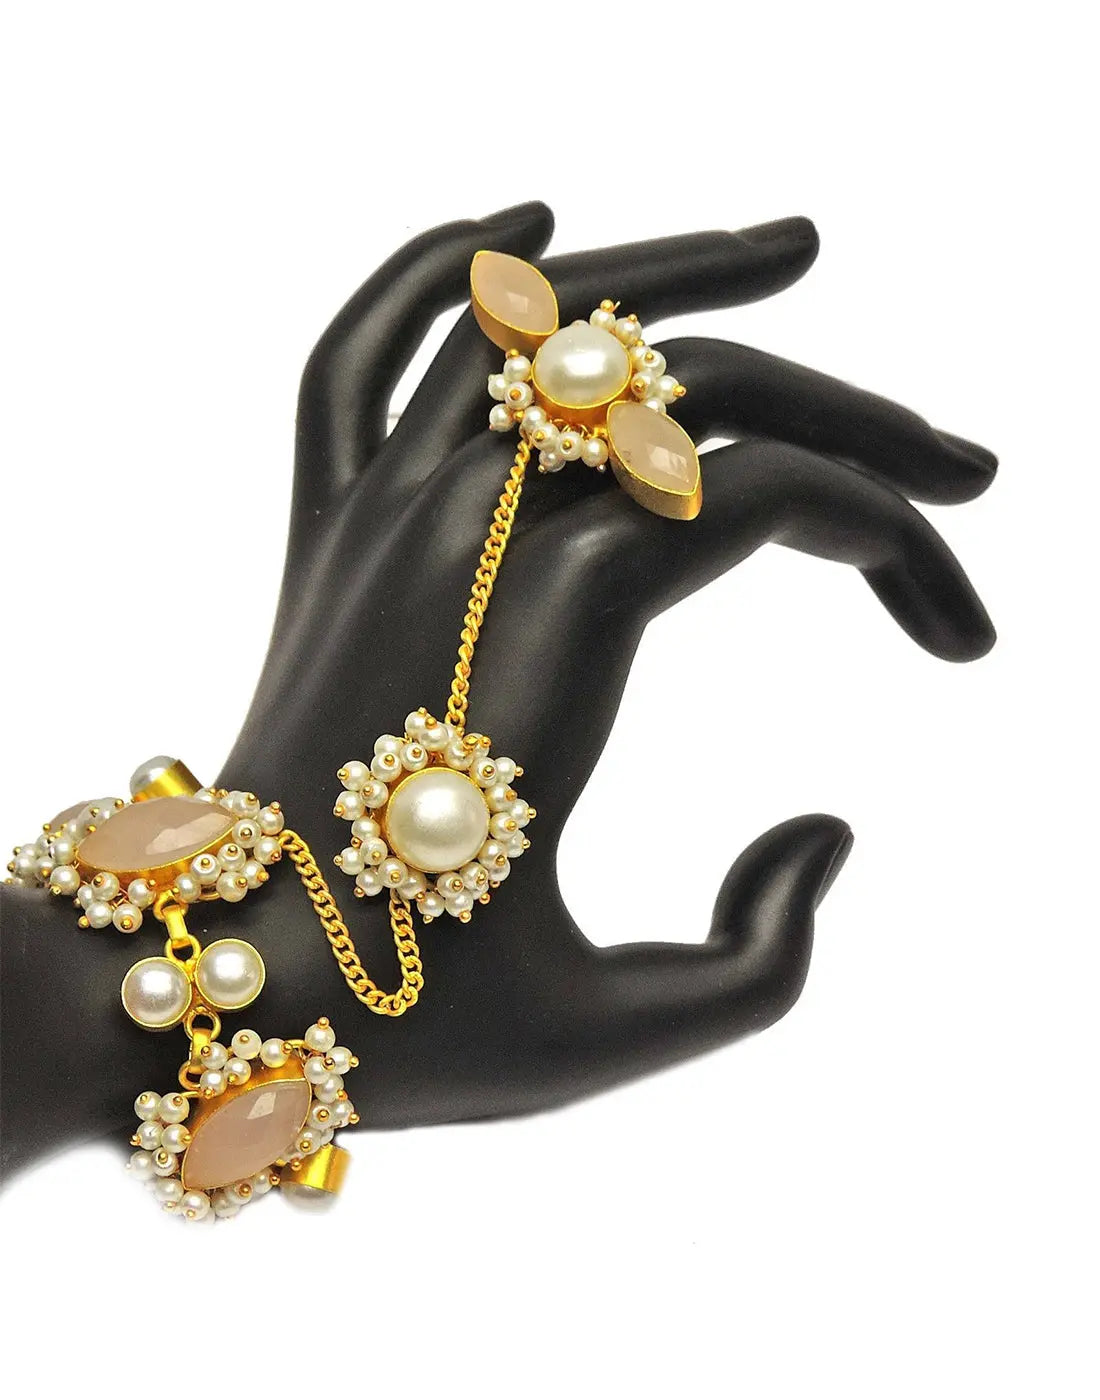 Rosea Hand Harness / Ring Bracelet- Handcrafted Jewellery from Dori